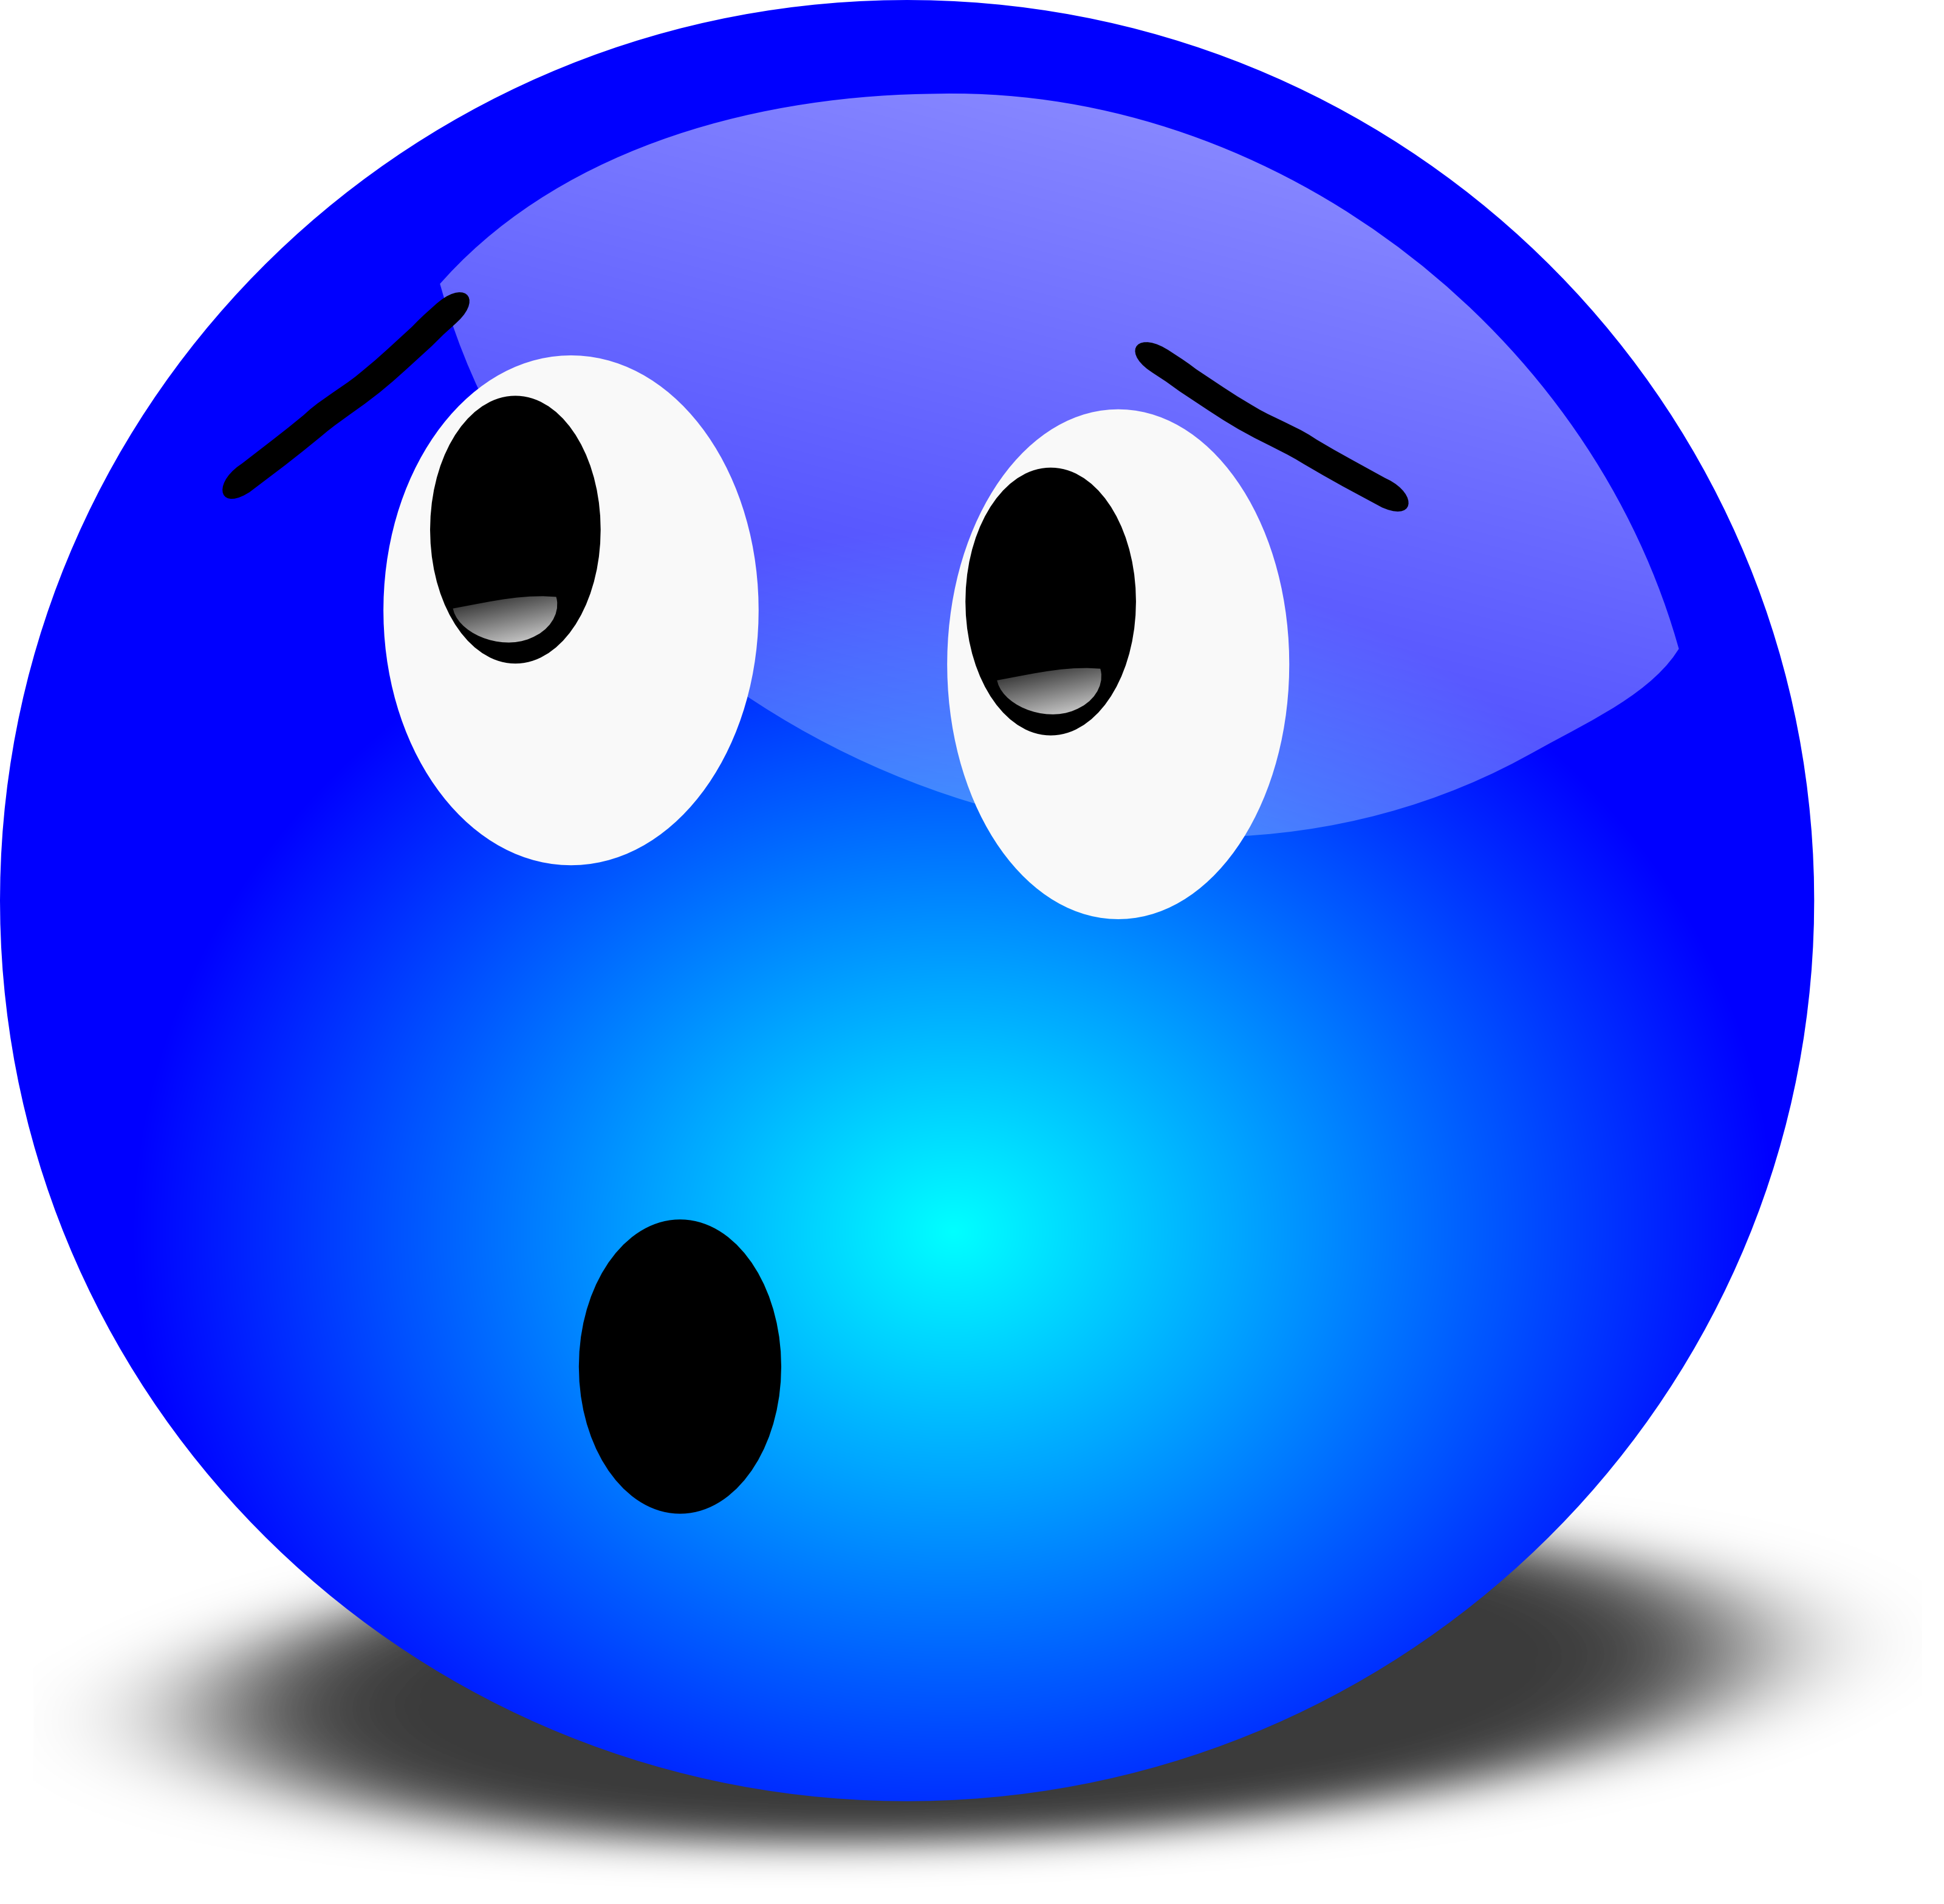 Worried Face Clip Art  Free 3D Worried Smiley Face Clipart Illustration by 000189  Recipes to